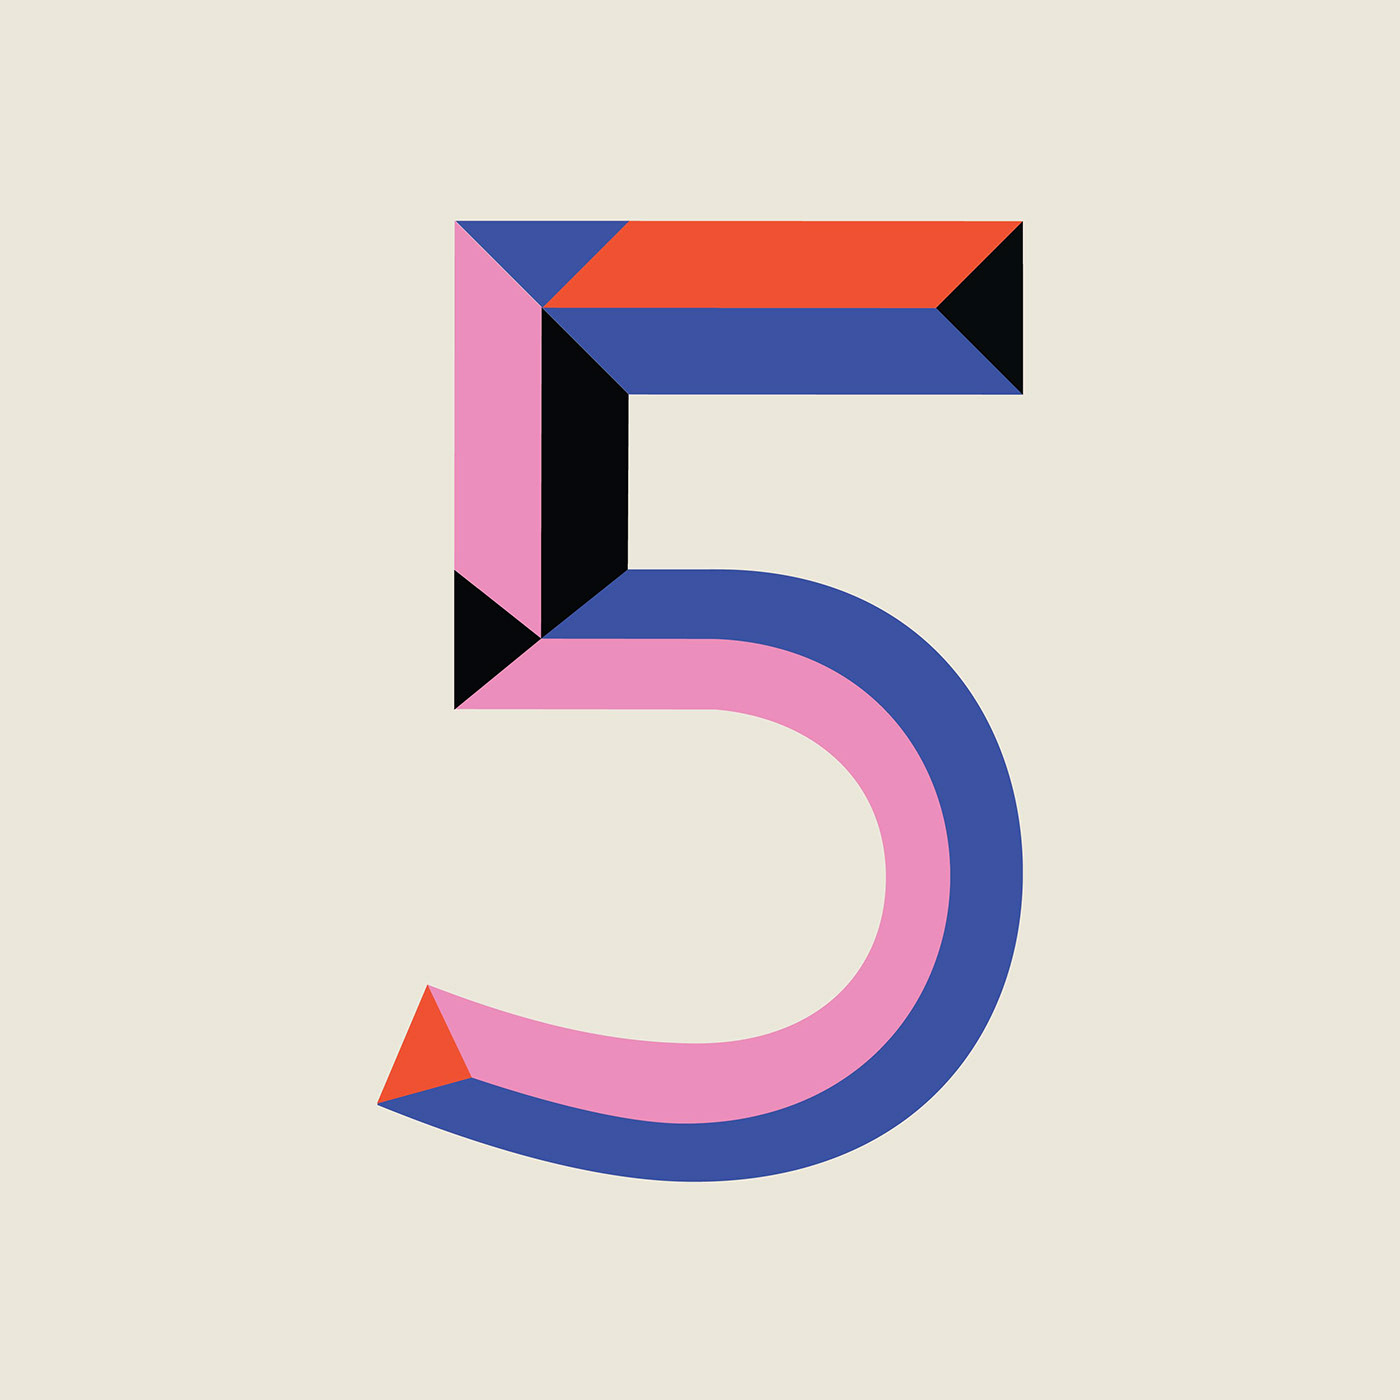 36daysoftype Albhabet Experimental Typography graphic design  ILLUSTRATION  Isolation number Number design stay home typography  